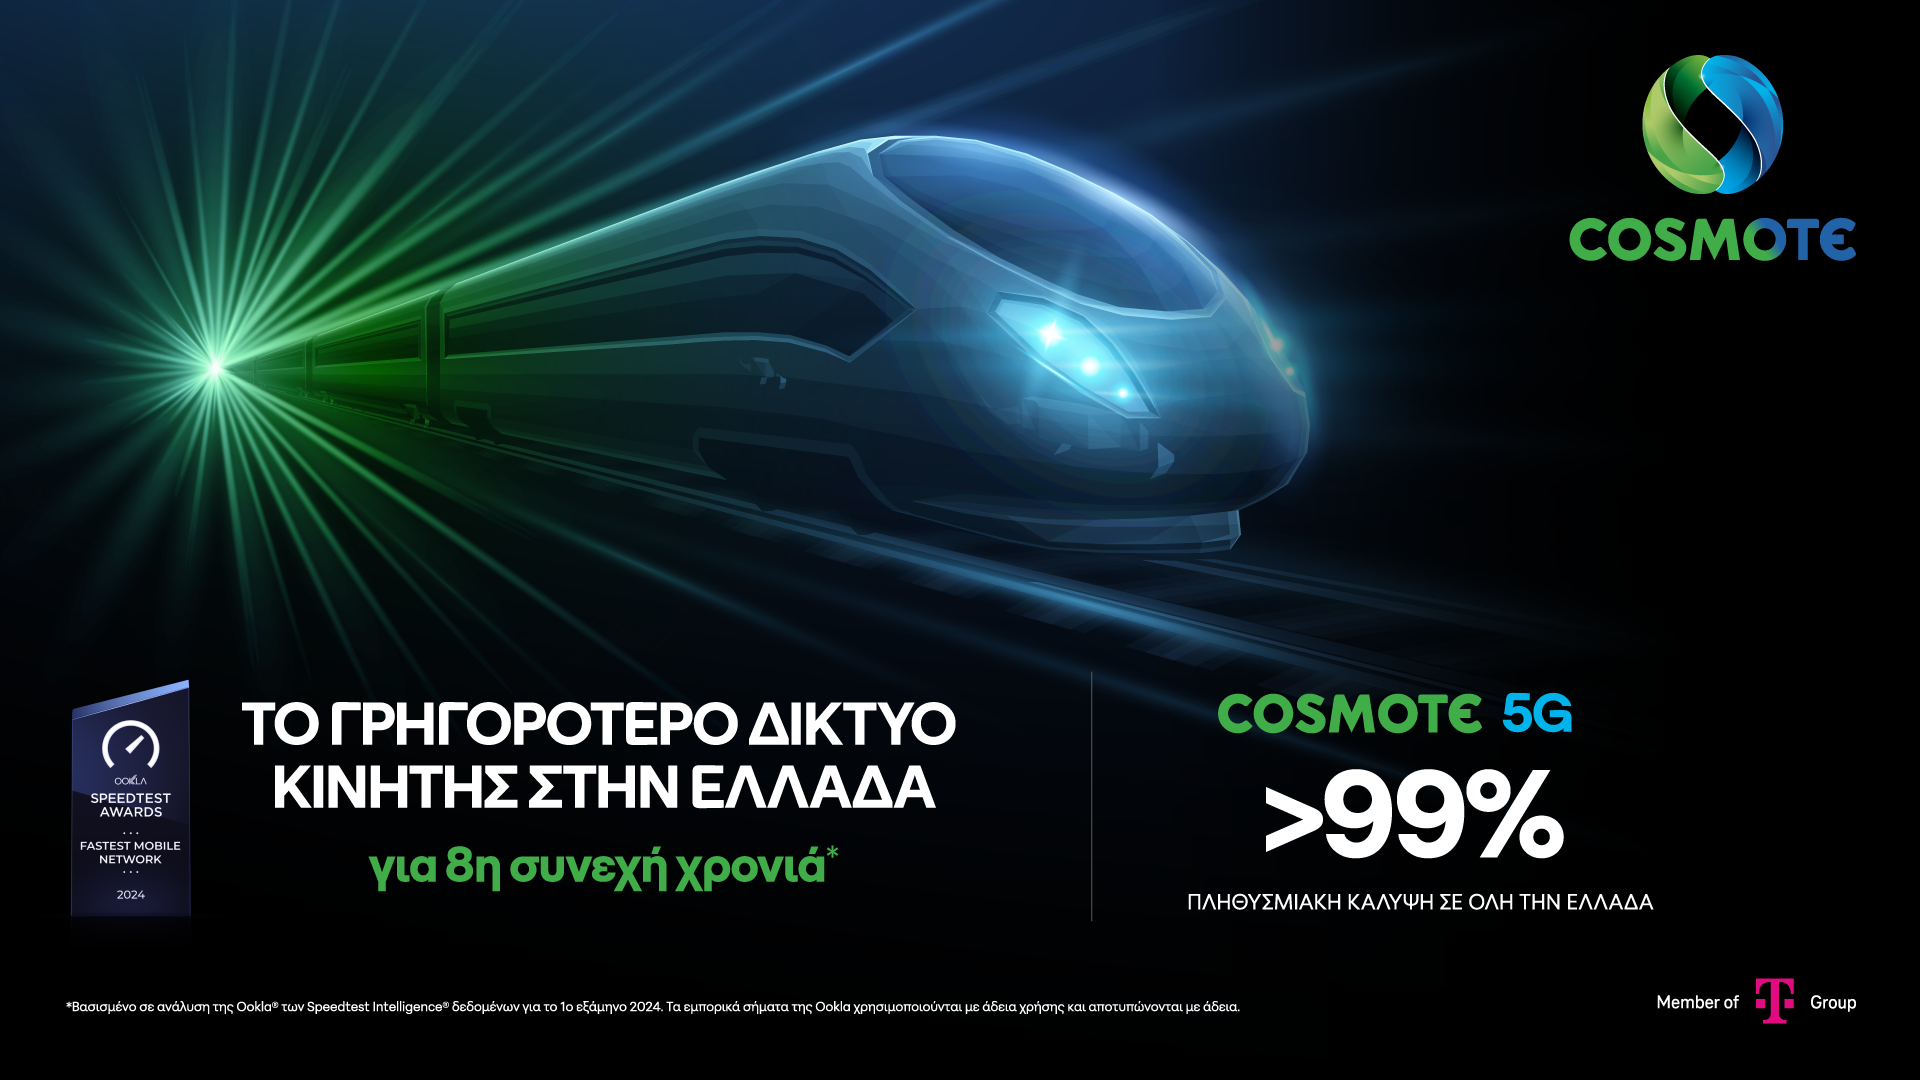 COSMOTE_5G_Ookla_gr.png